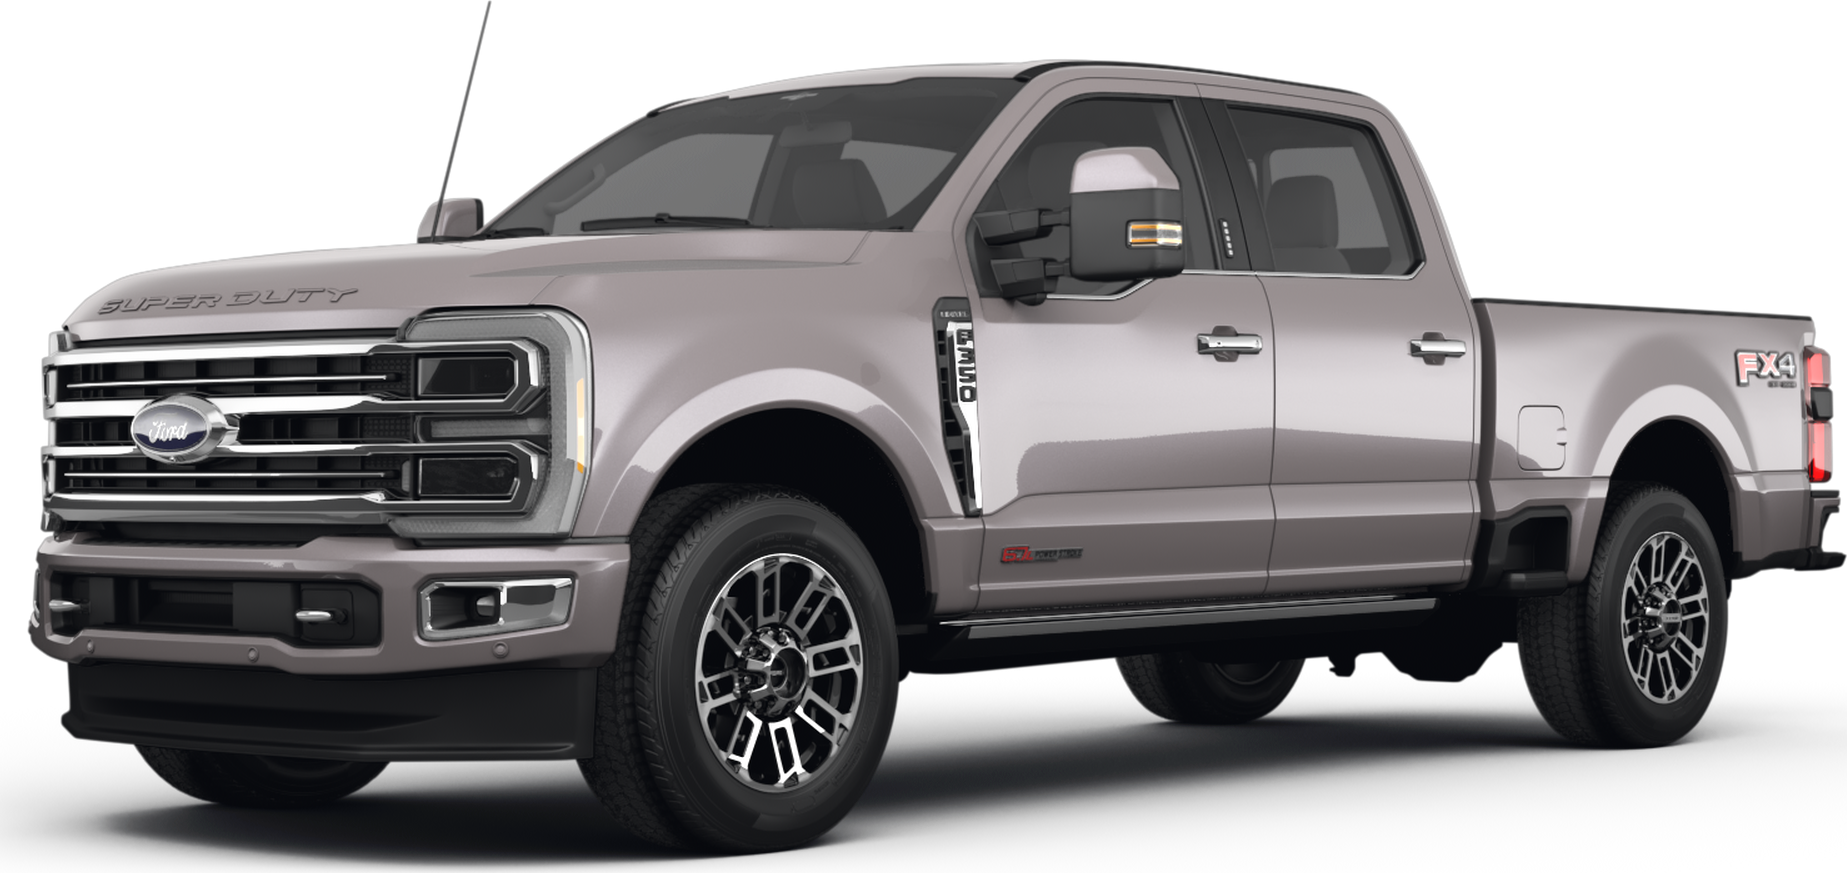 2023 Ford F350 Super Duty Crew Cab Price, Reviews, Pictures & More